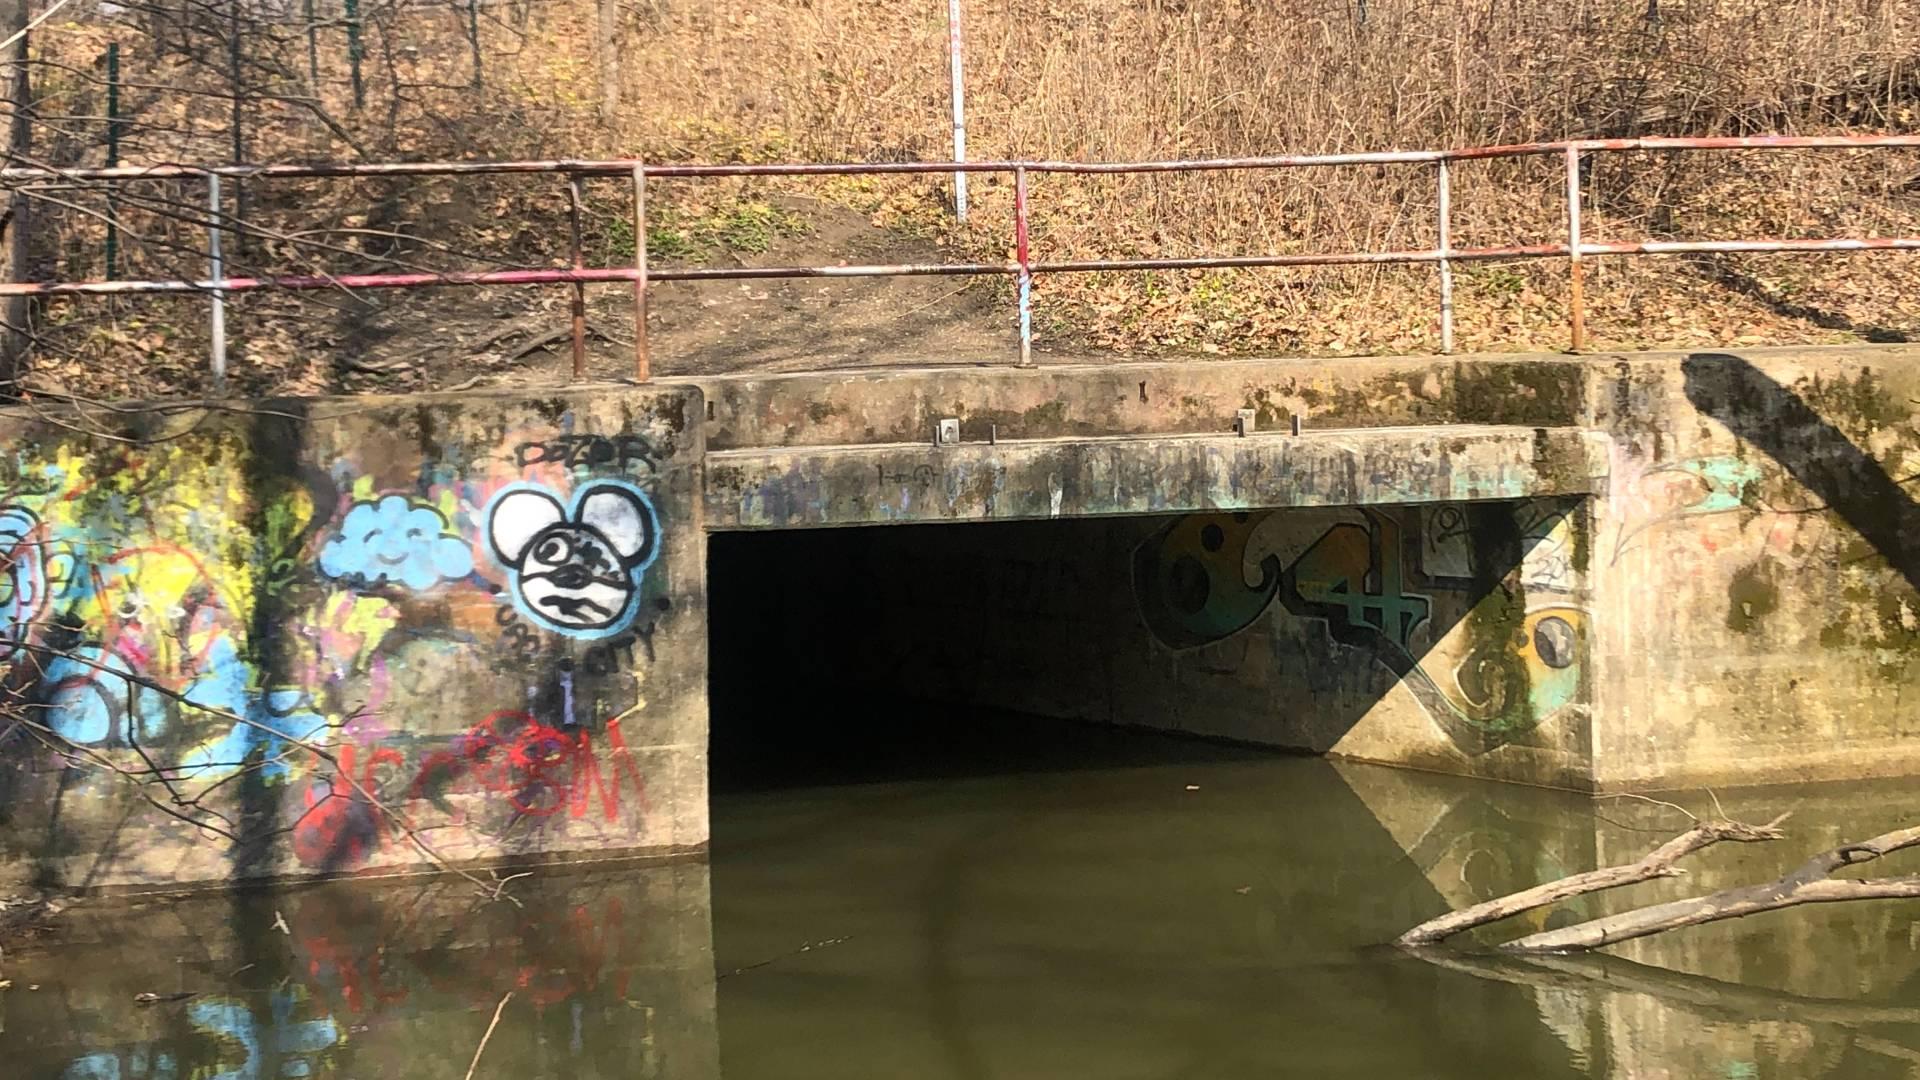 An outfall in LaBagh Woods, a Cook County forest preserve. (Patty Wetli / WTTW News)